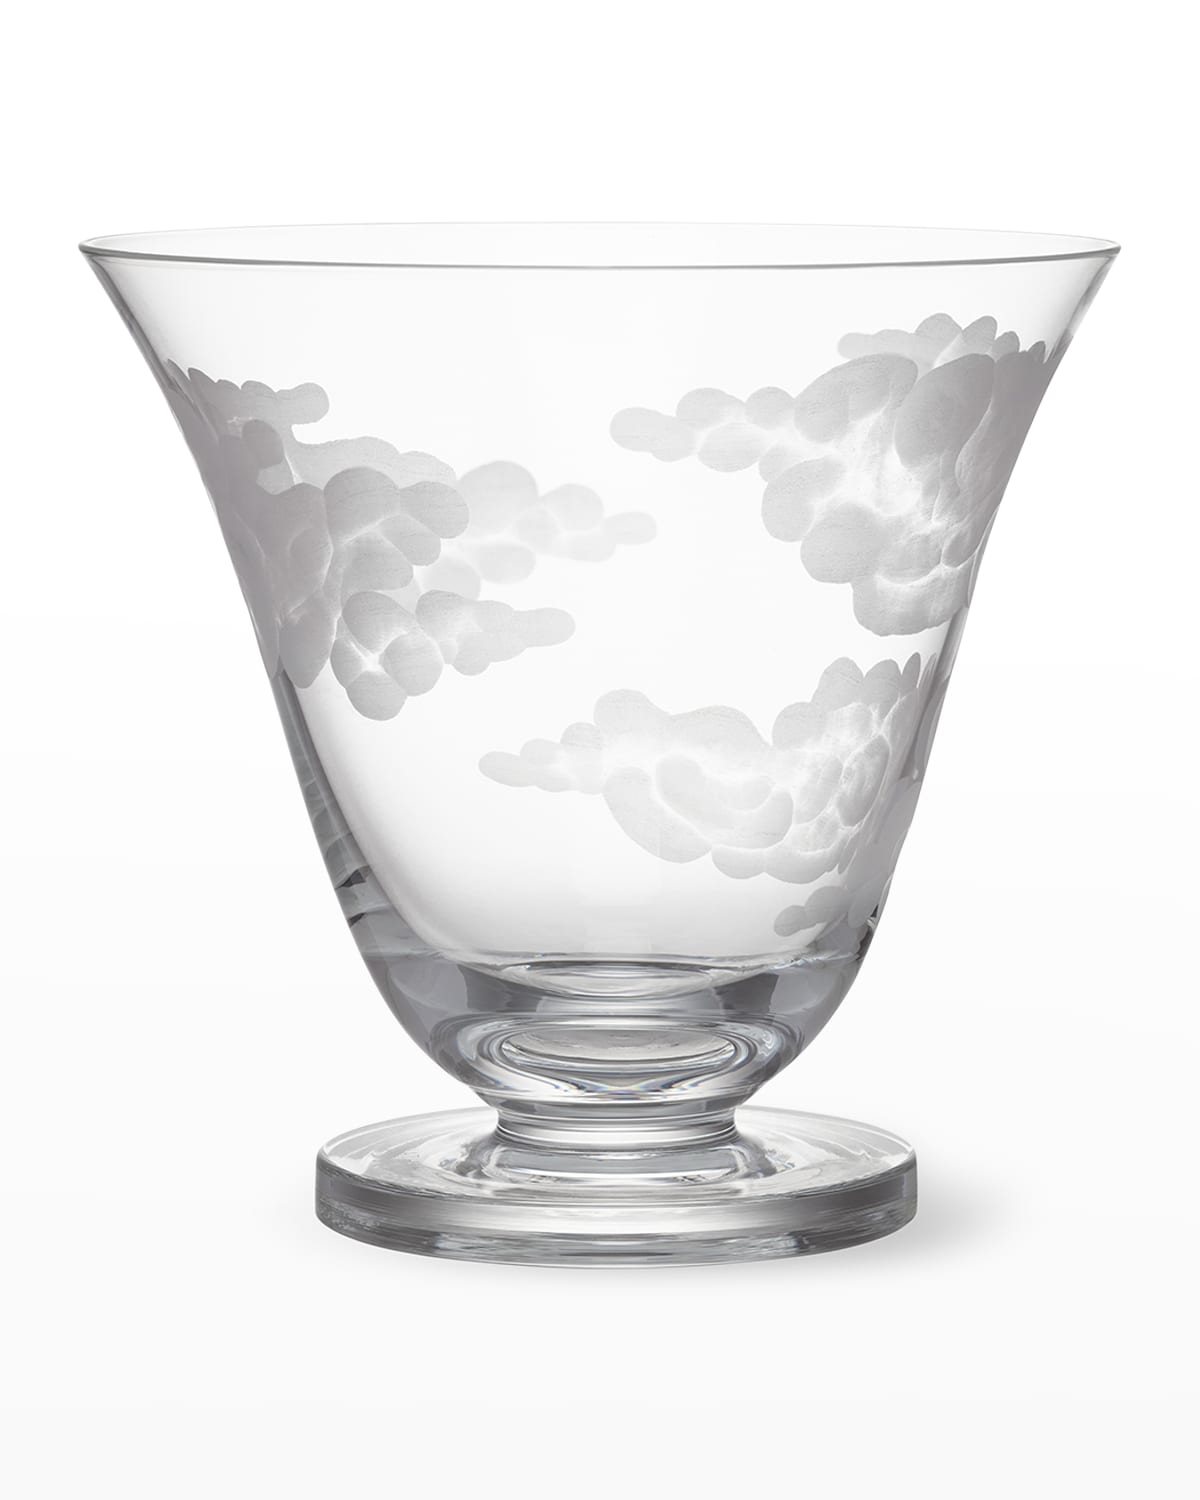 In The Clouds Stemless Wine Glass, Clear - 8 oz.